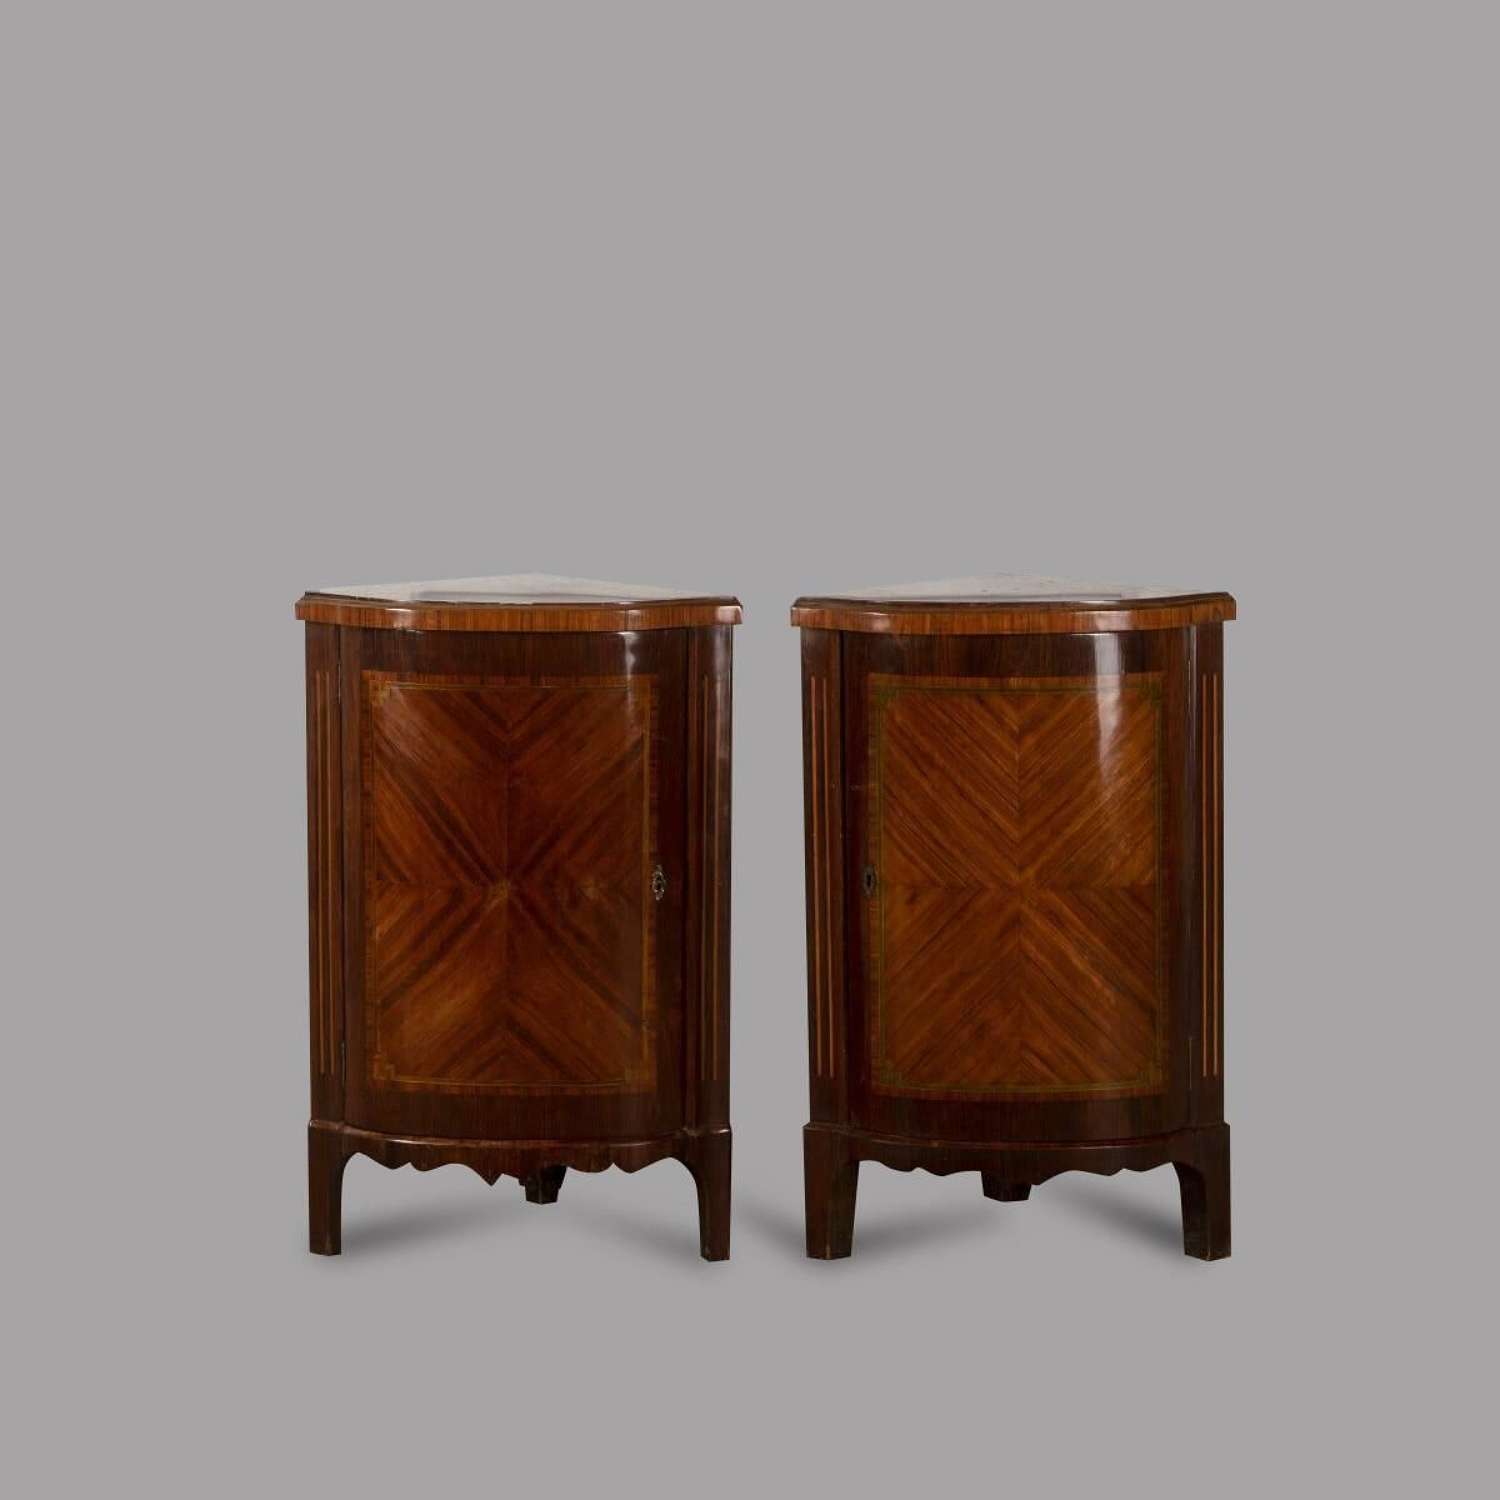 Pair of French Directoire Corner Cabinets with Mirrored Interiors and